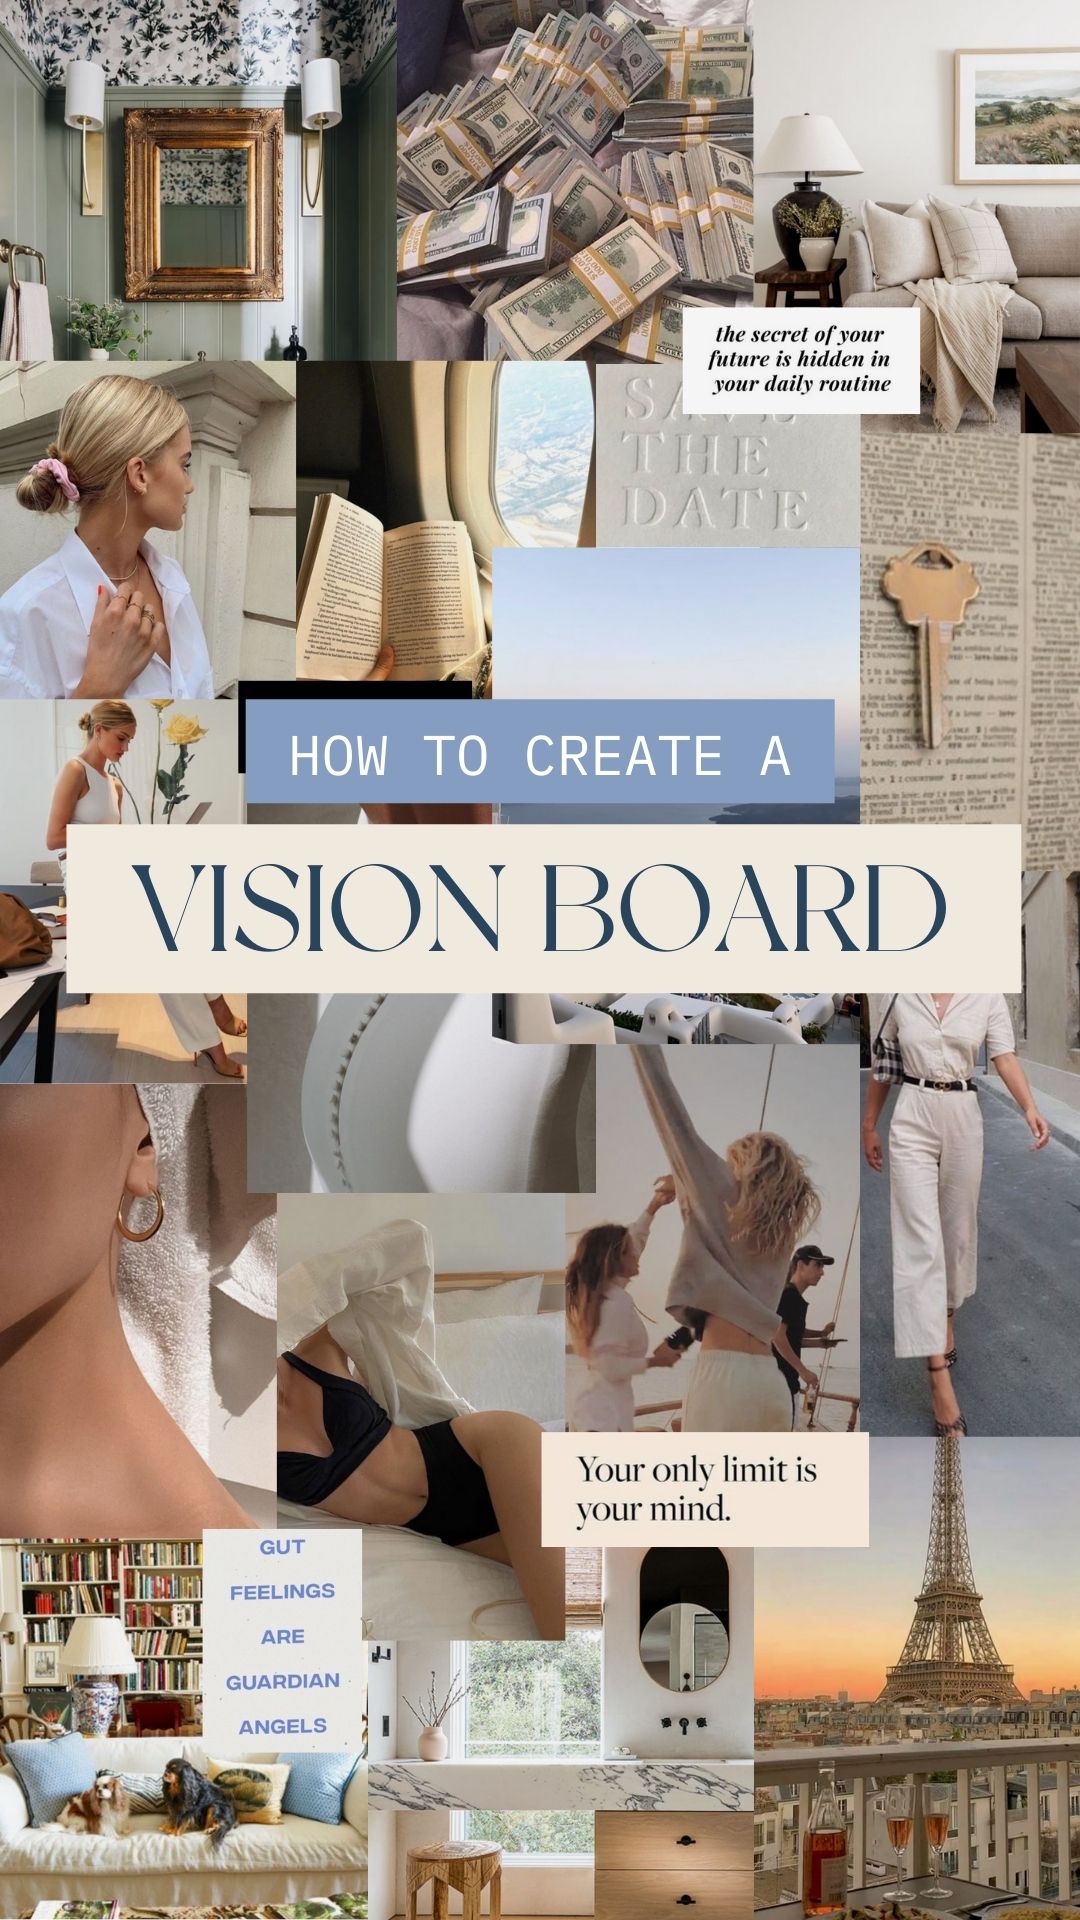 How to Create a Vision Board